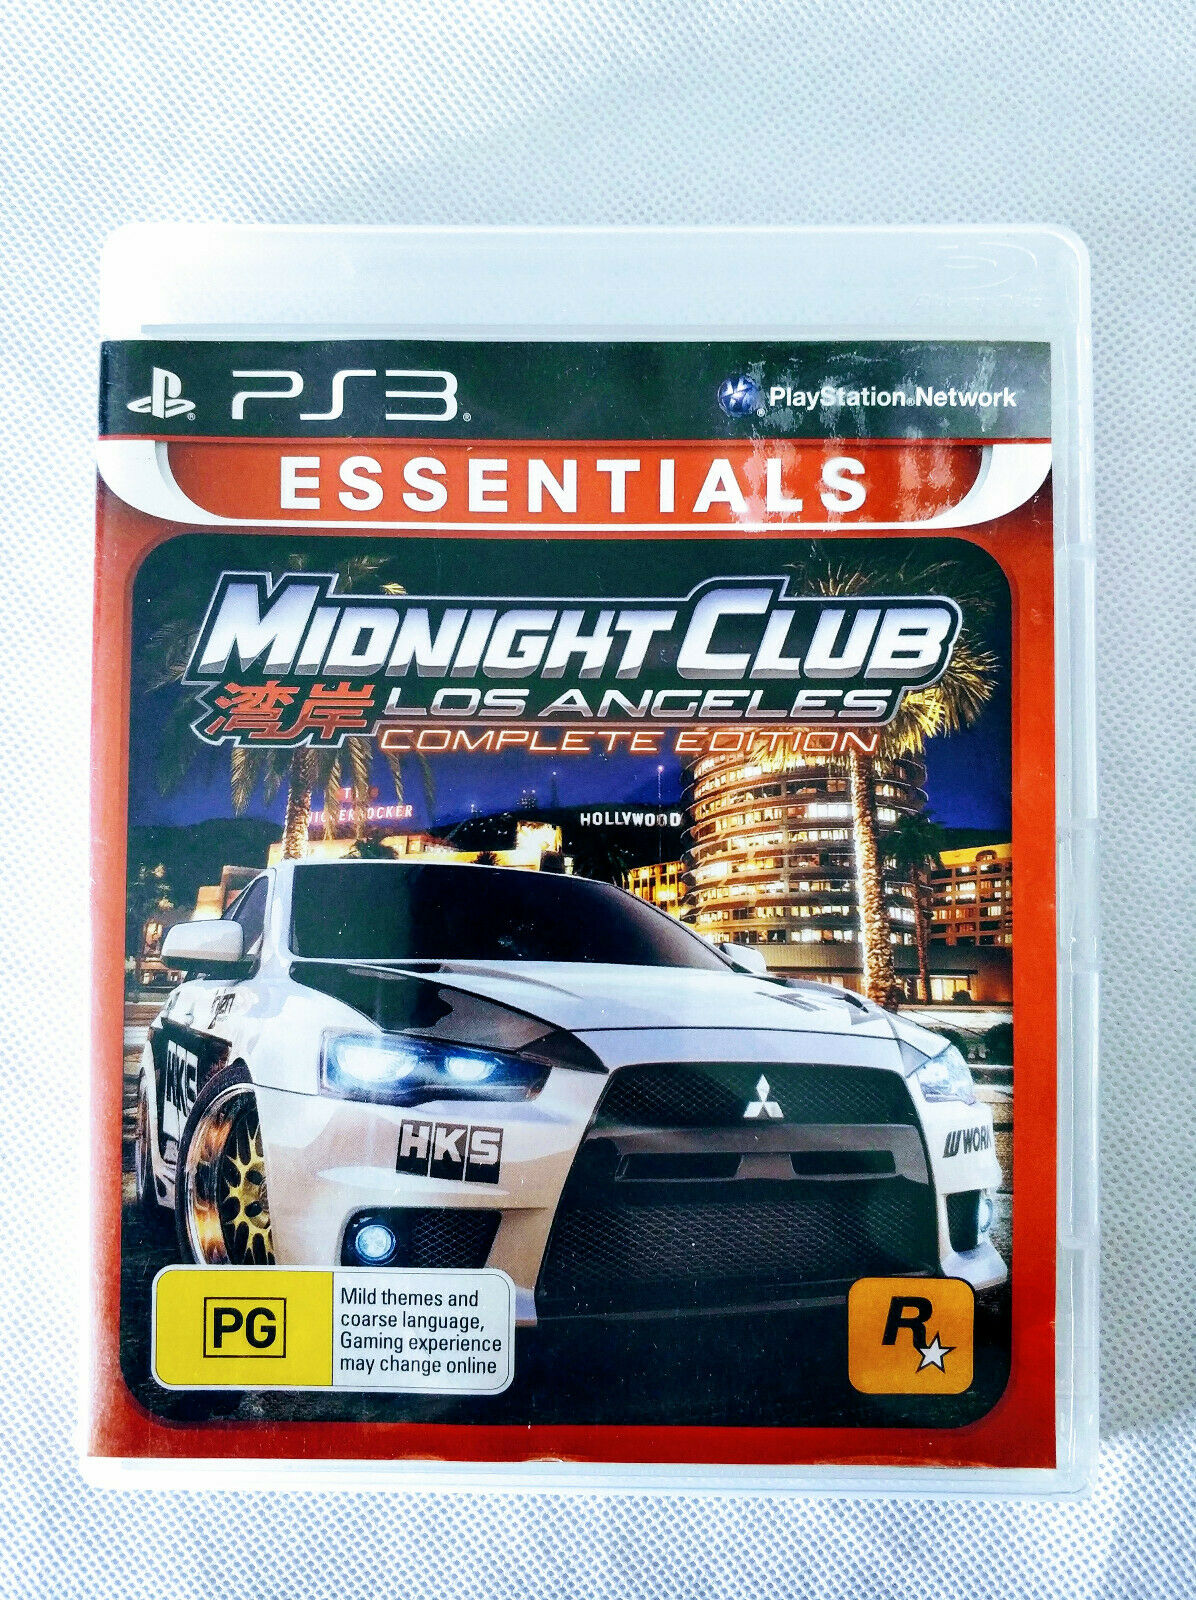 Lima Definition Superficial Mint Disc Playstation 3 Ps3 Midnight Club Los Angeles Complete Edition - No  Manual - Starboard Games